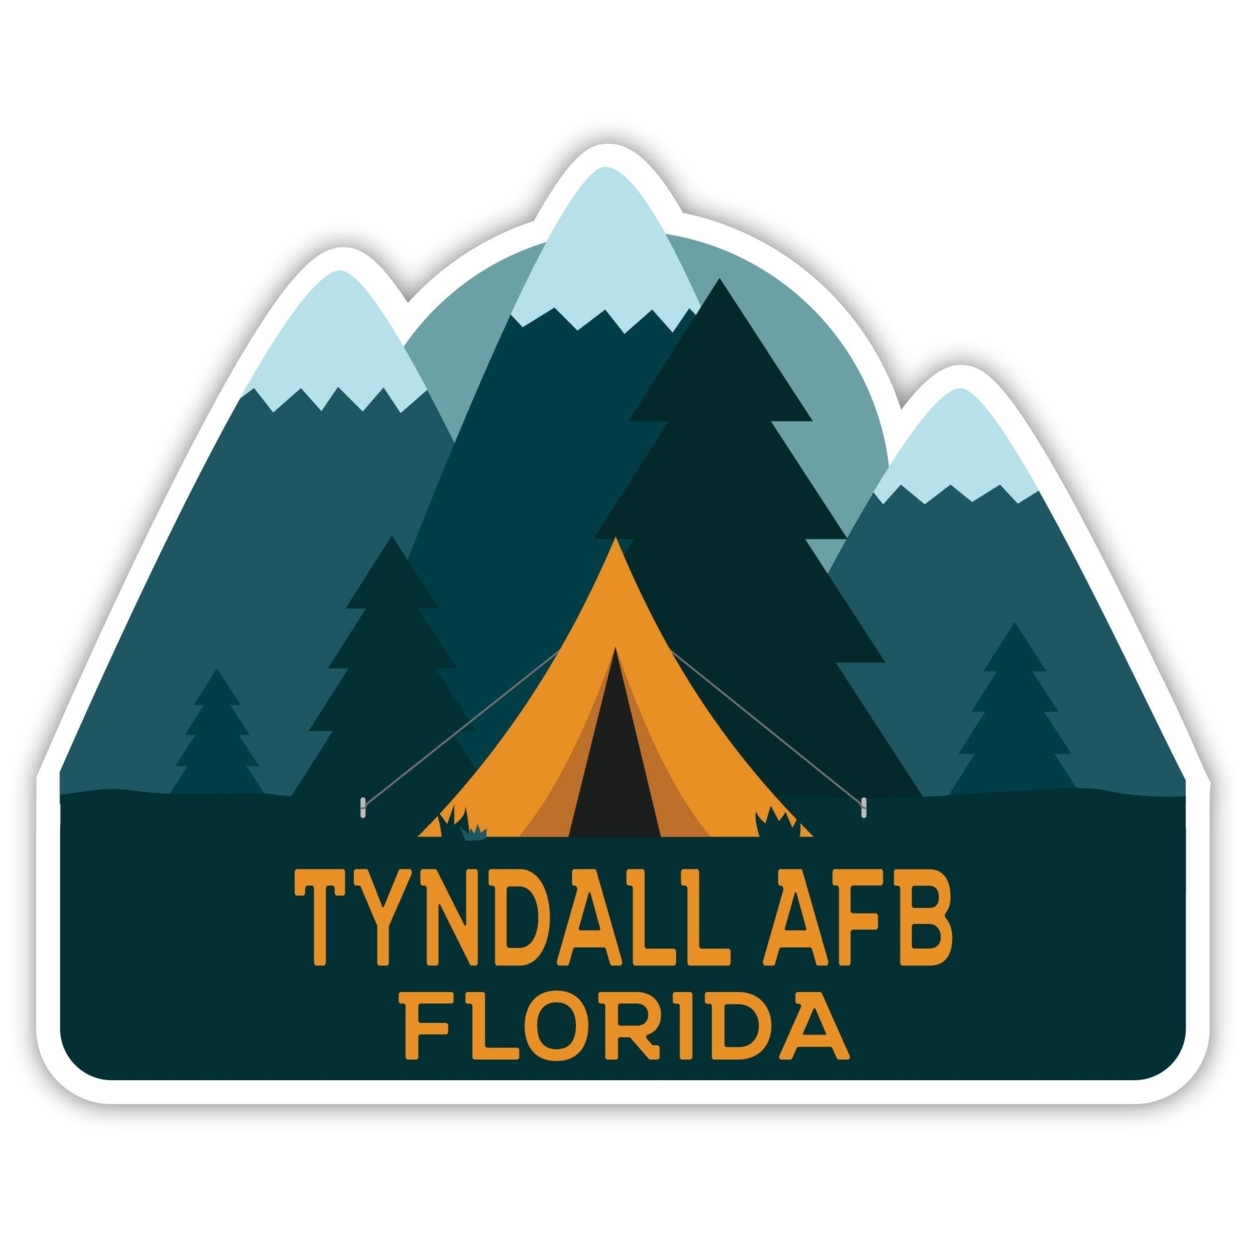 Tyndall AFB Florida Souvenir Decorative Stickers (Choose Theme And Size) - Single Unit, 4-Inch, Tent